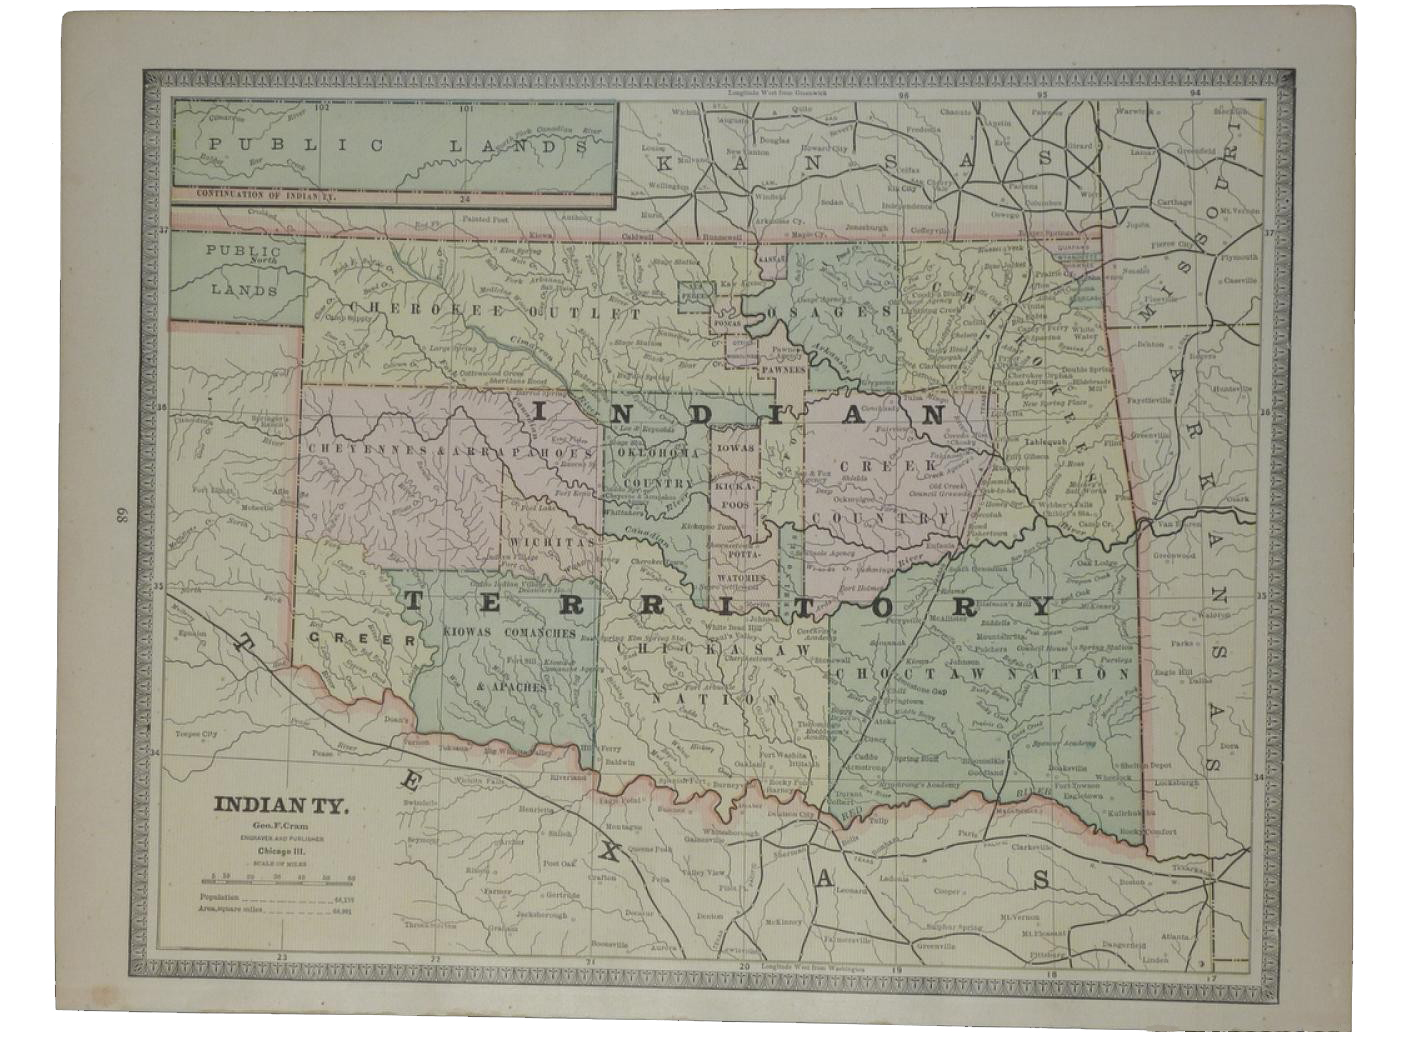 1885 Map of “Indian Territory”